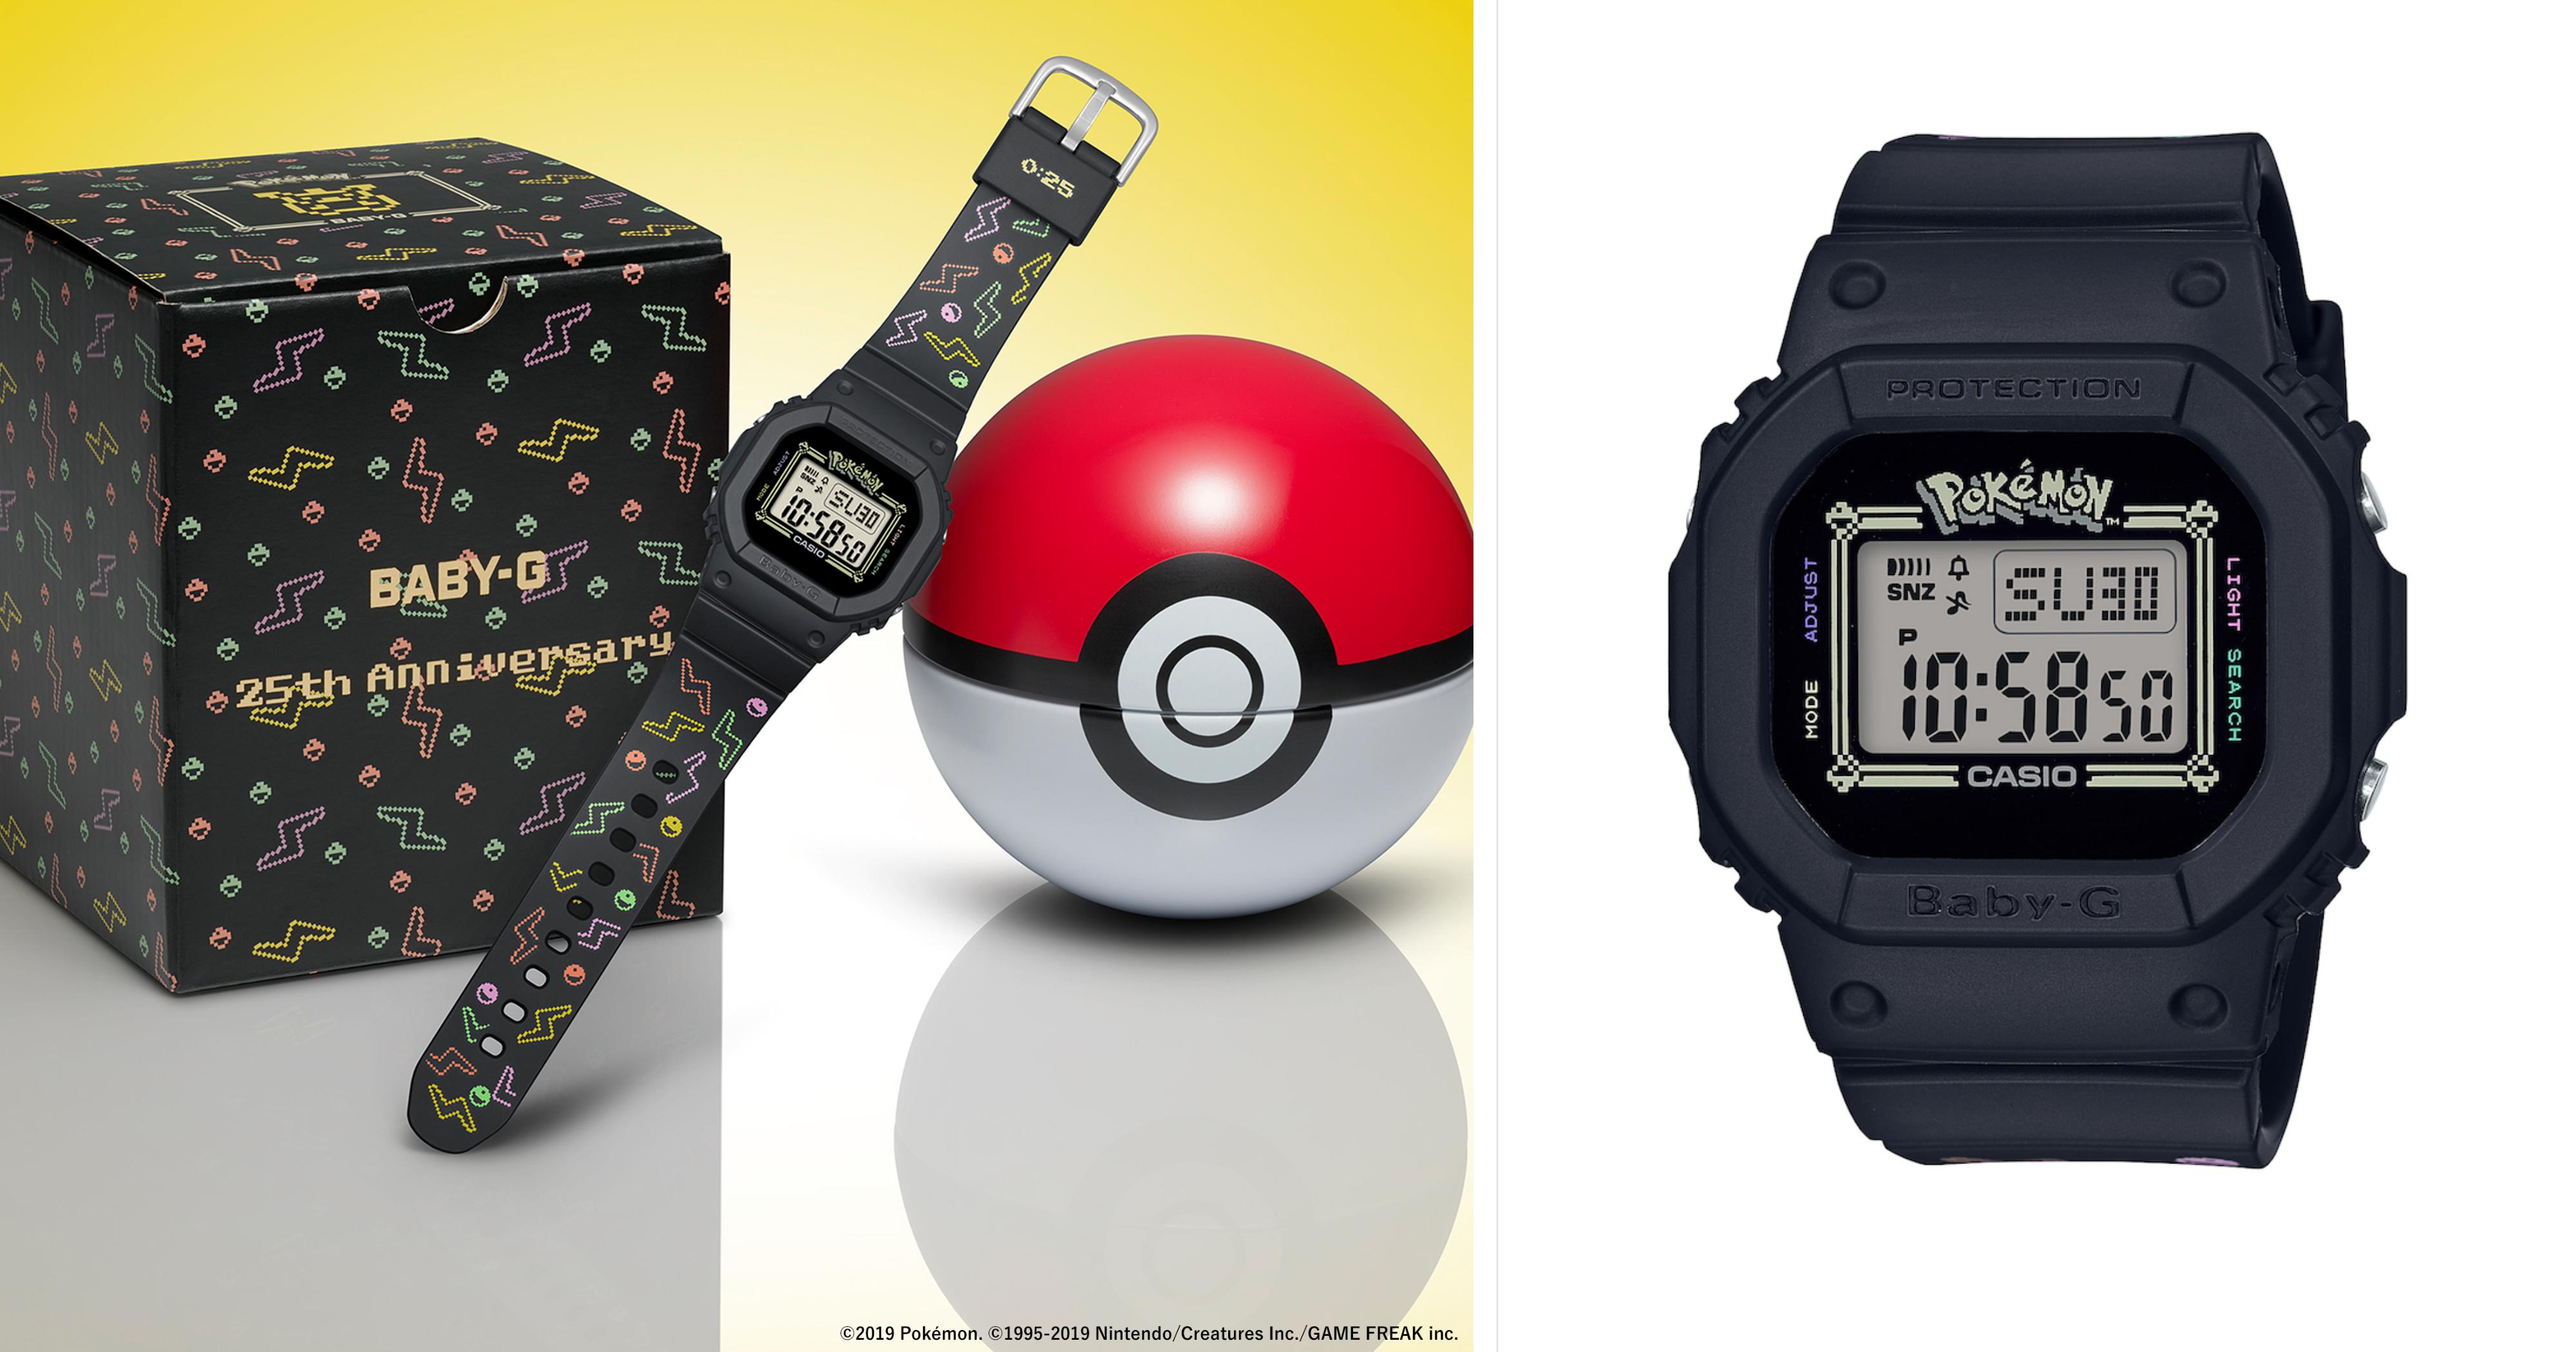 Nintendo Pokémon Pikachu Watch with Charms and Silicone Band $39.99